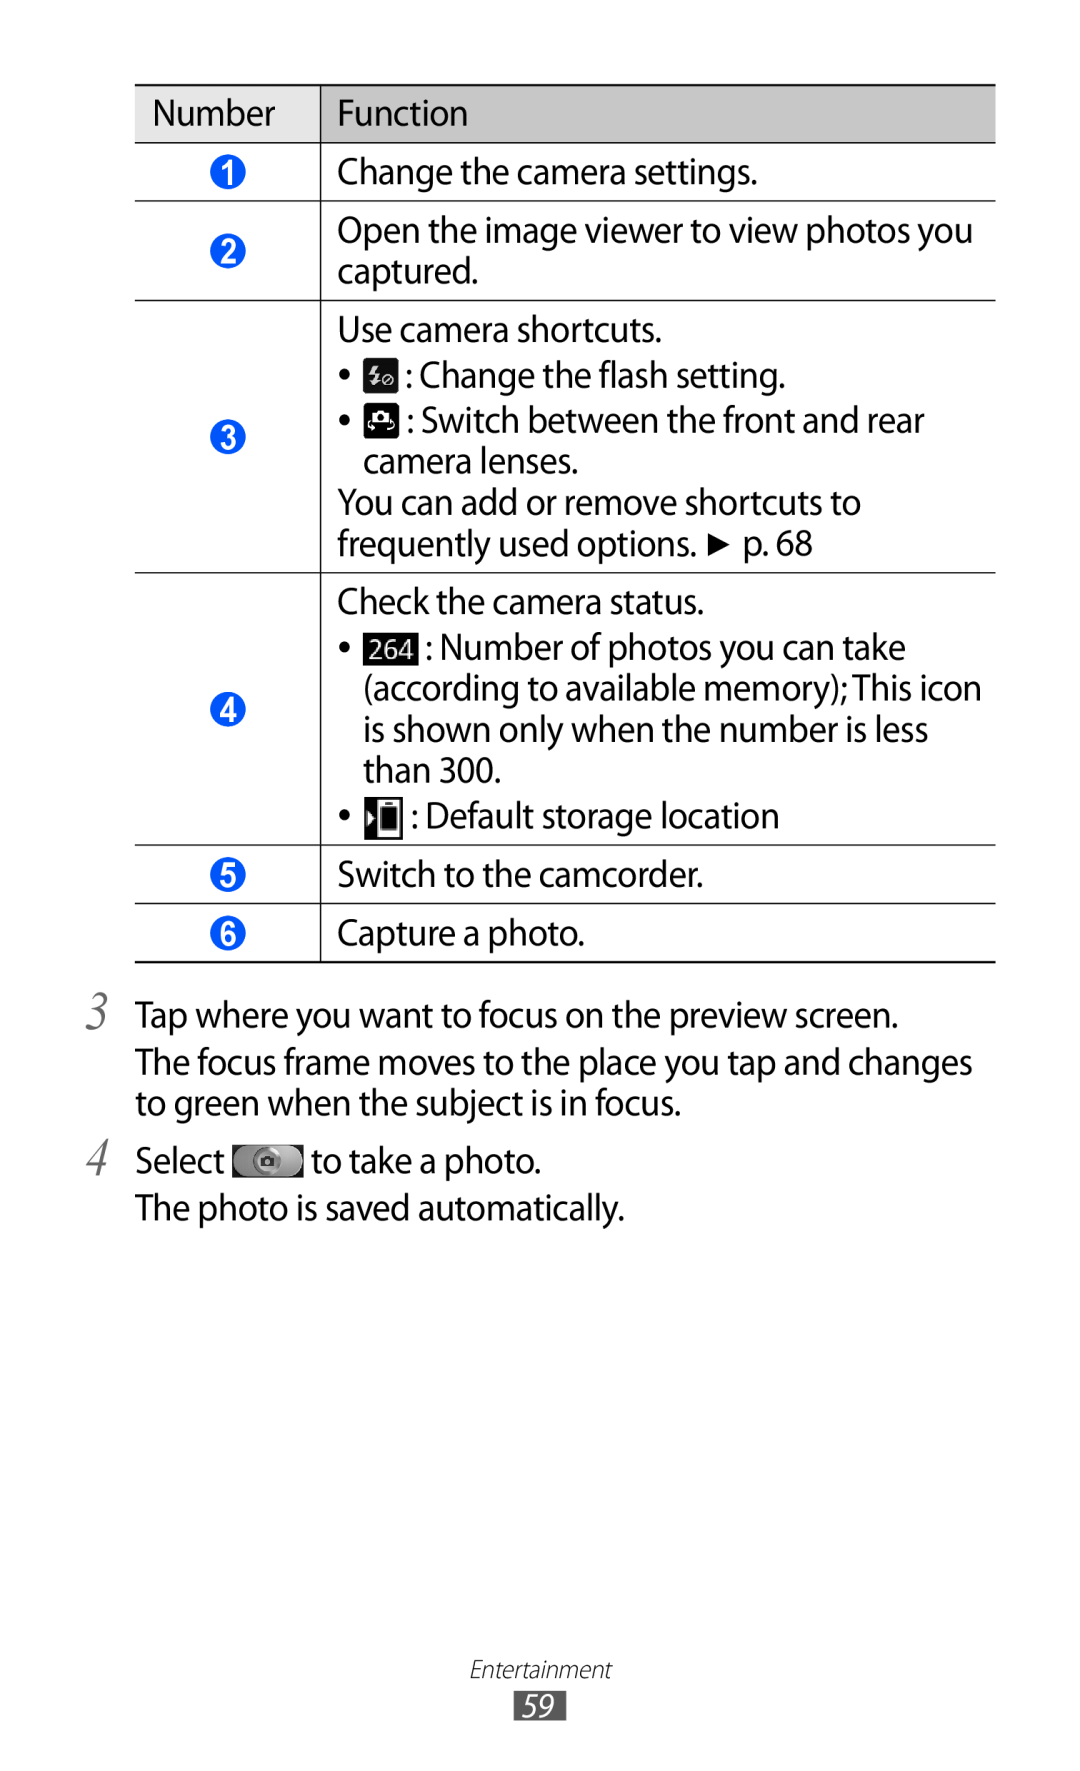 Samsung GT-I9070 user manual You can add or remove shortcuts to frequently used options. p 